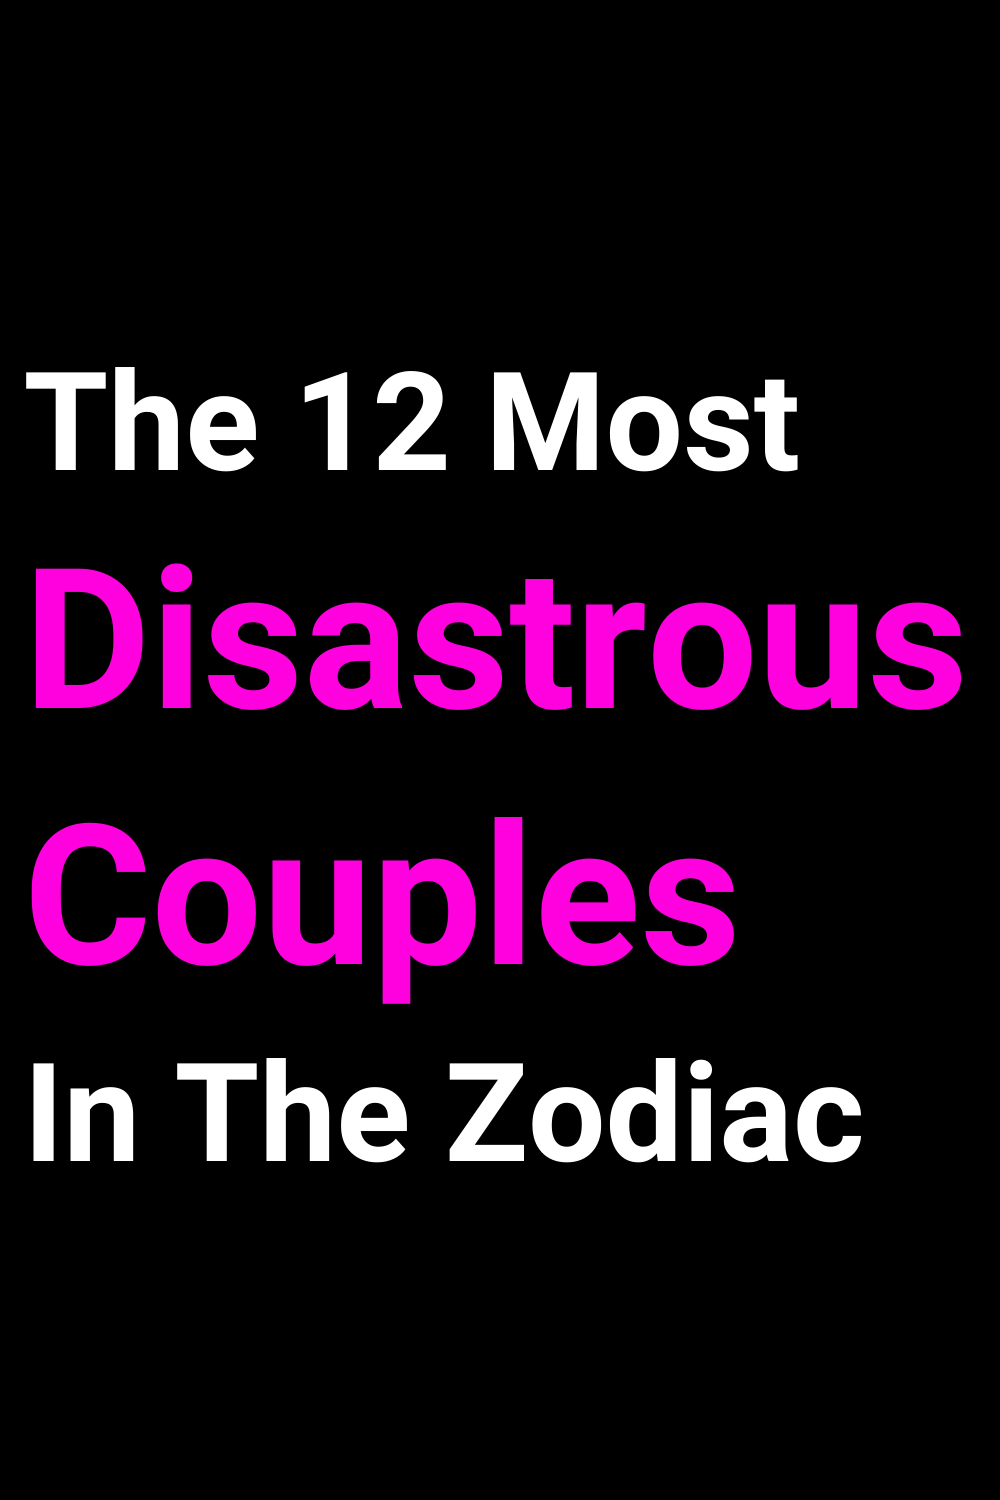 The 12 Most Disastrous Couples In The Zodiac